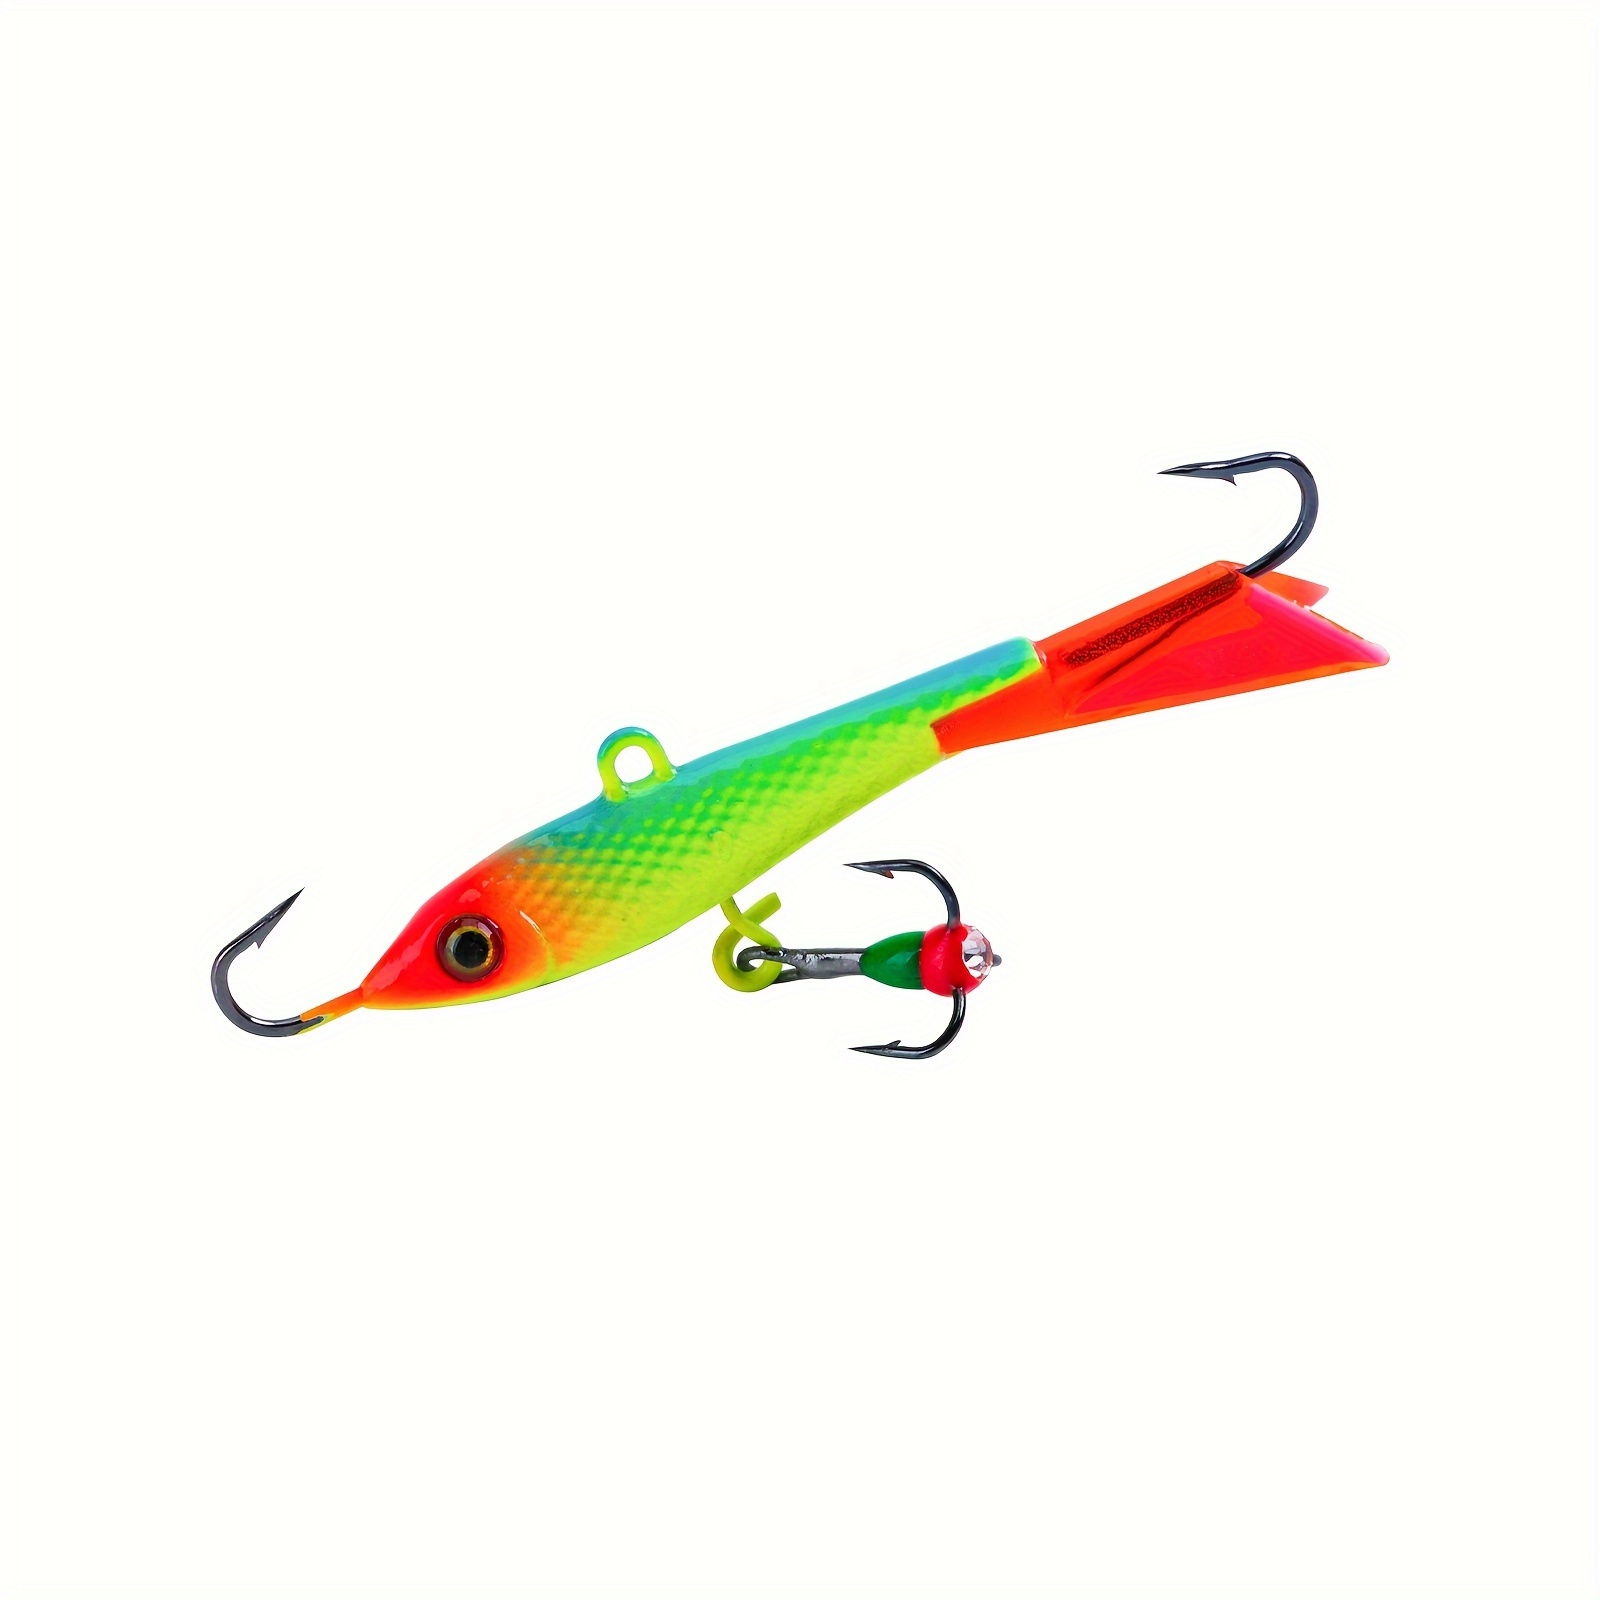 Goture 1pc Red Fishing Lures Set, Ice Fishing Lures with Treble Hooks  Winter Lifelike Fishing Baits Balanced Jigging Lures Kit for Crappie,  Yellow Perch, Walleye, Pike and Lake Trout